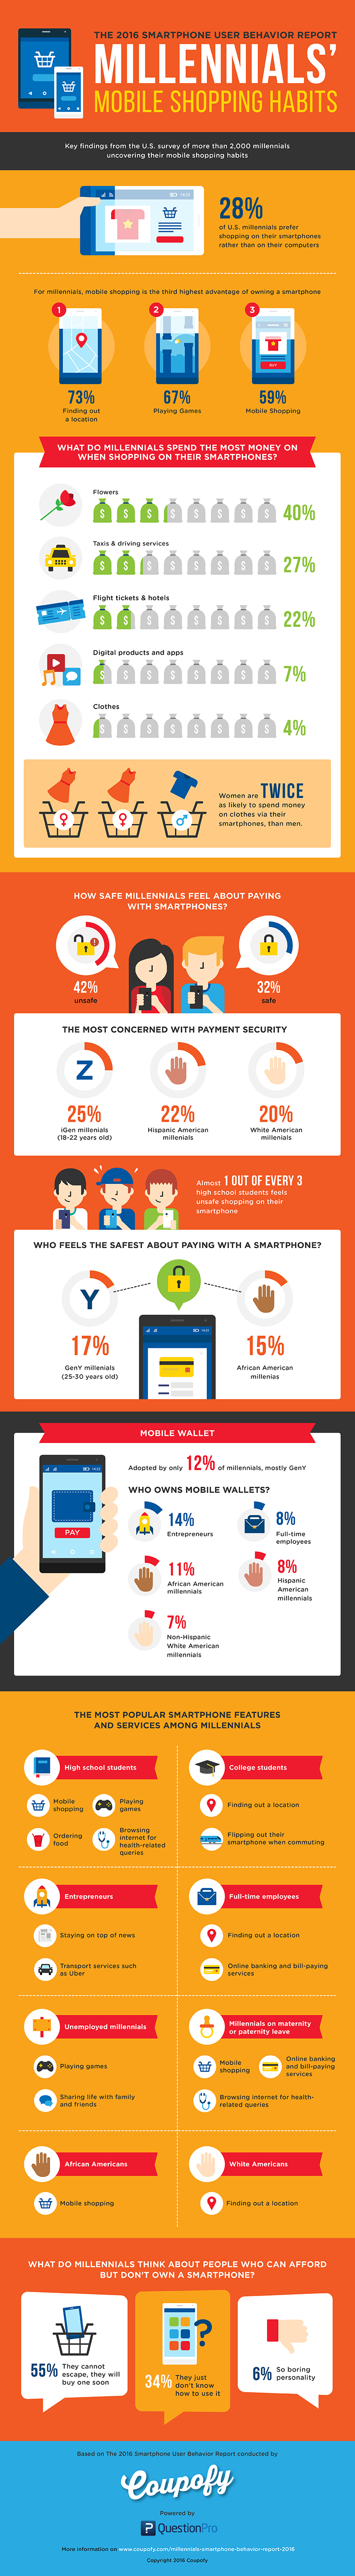 Mobile Shopping Habits of Millennials